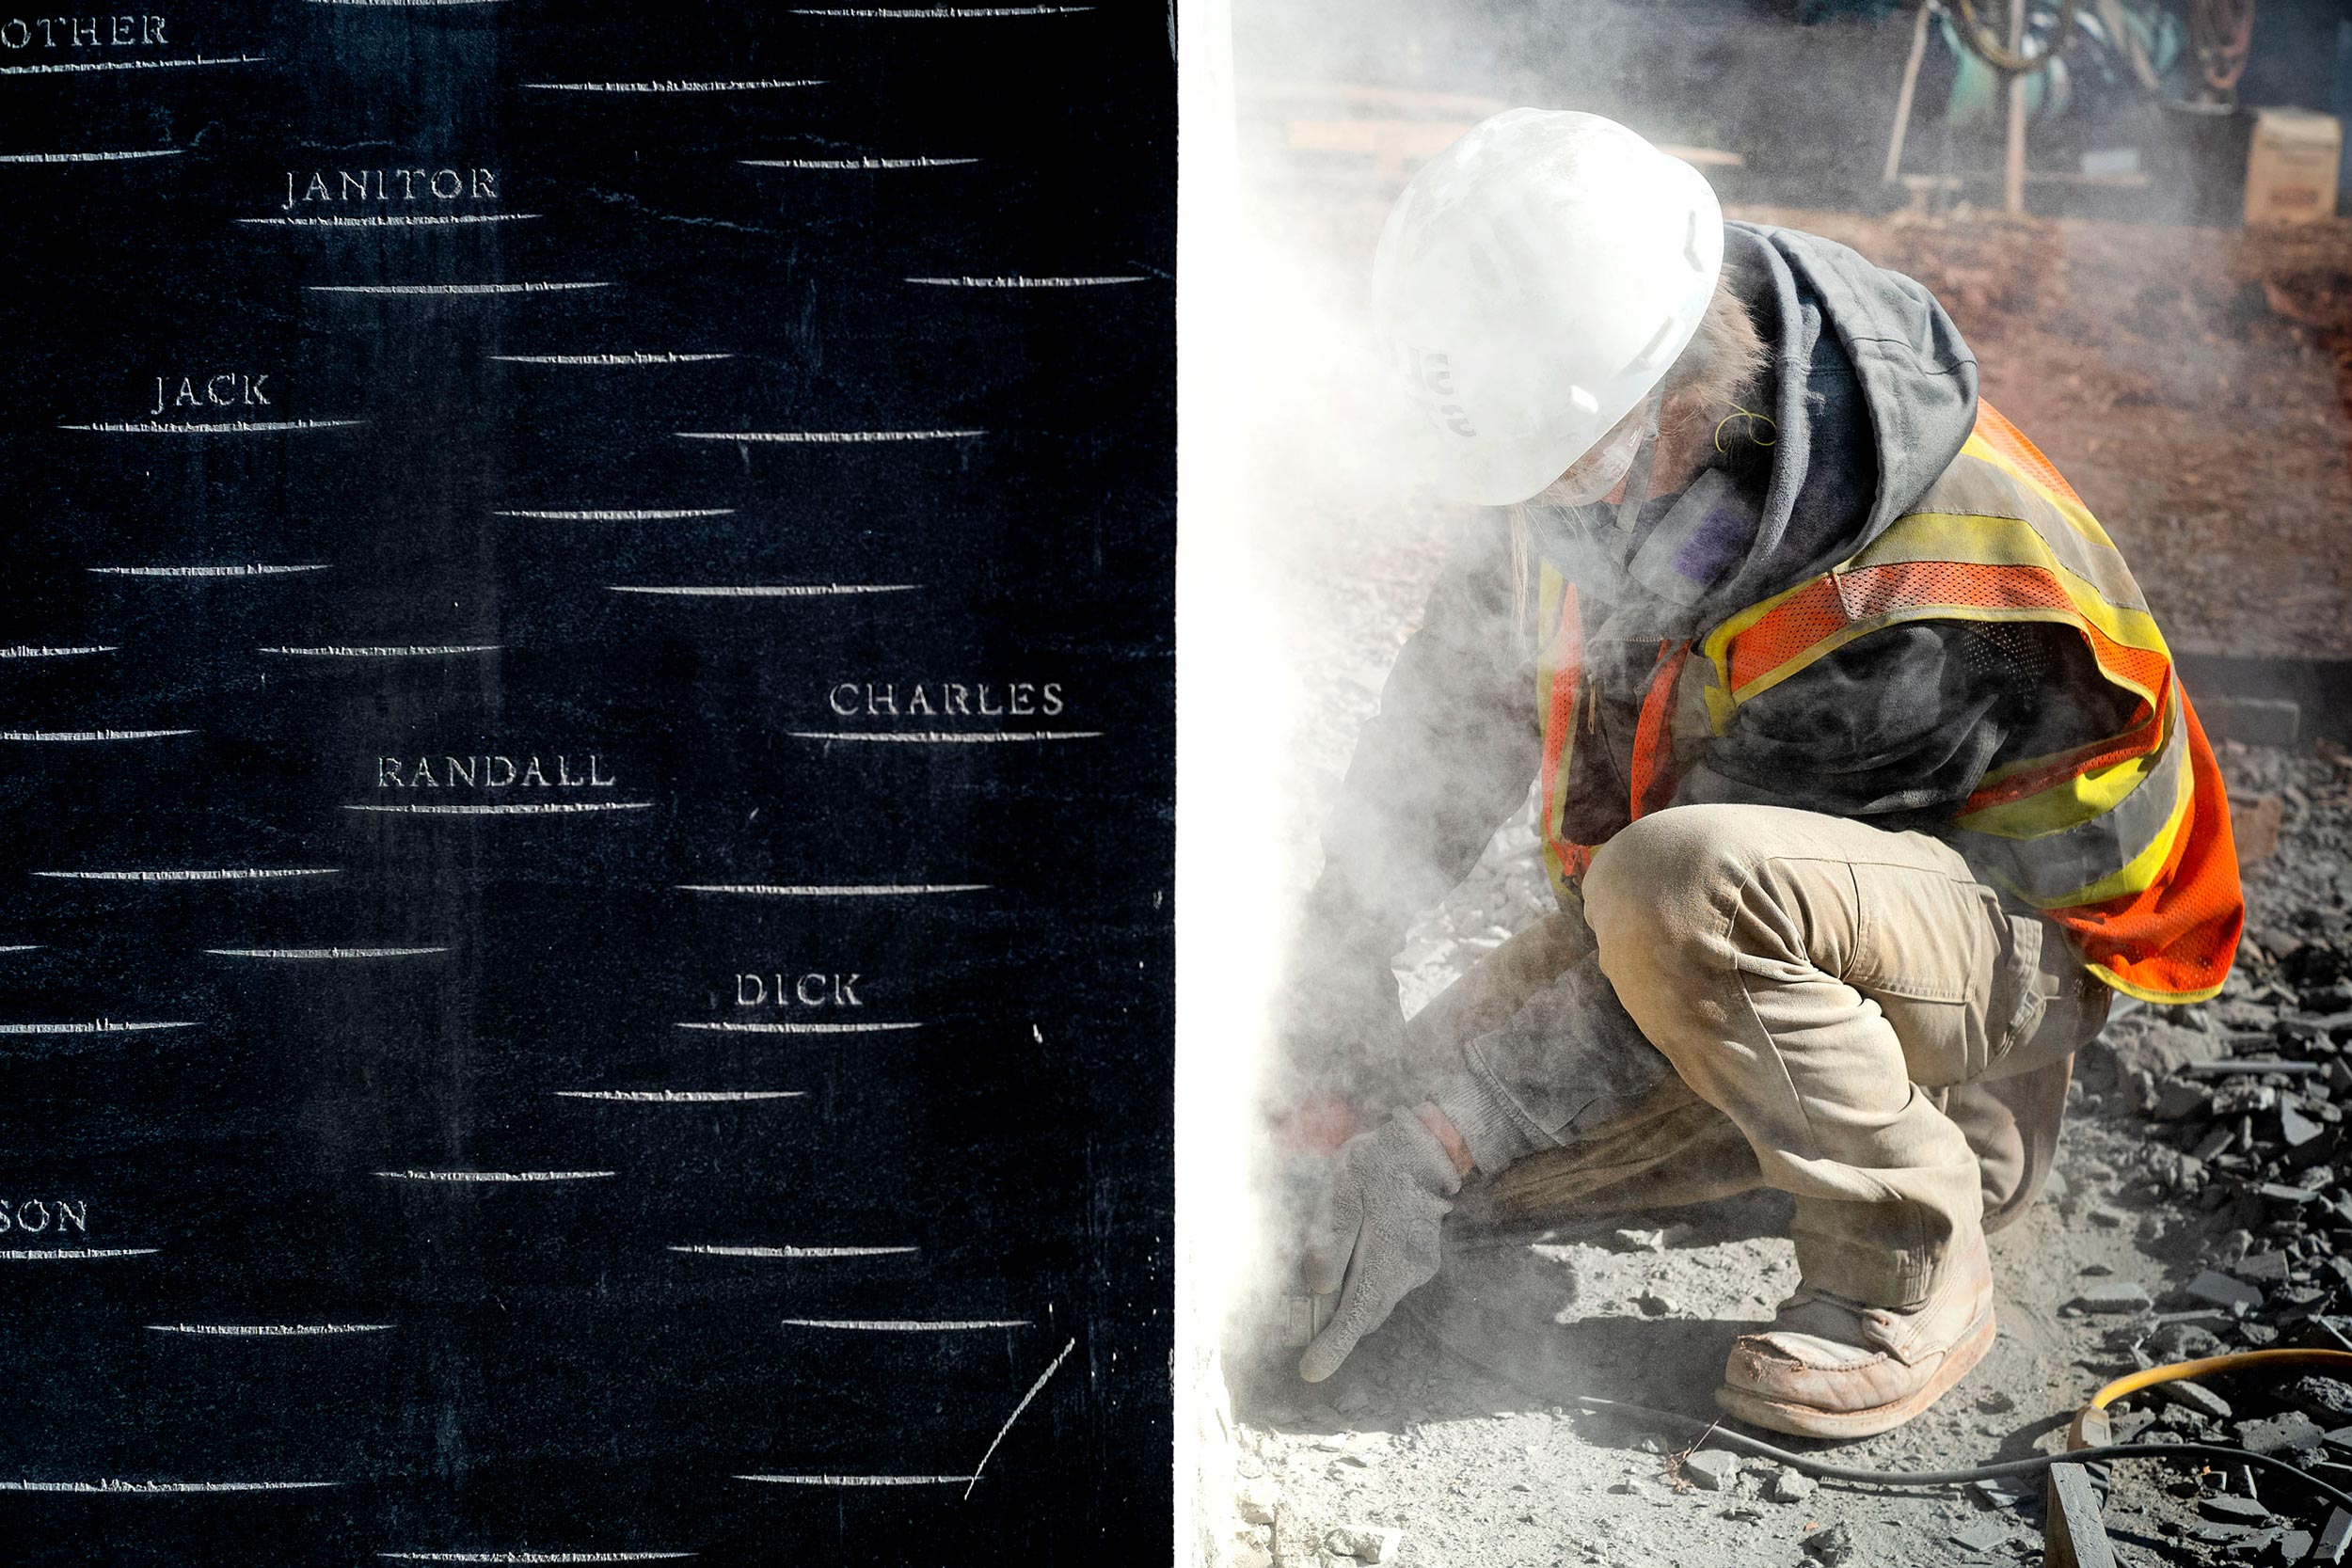 left: engraved names on a black surface. Right: Construction worker blasting into the ground